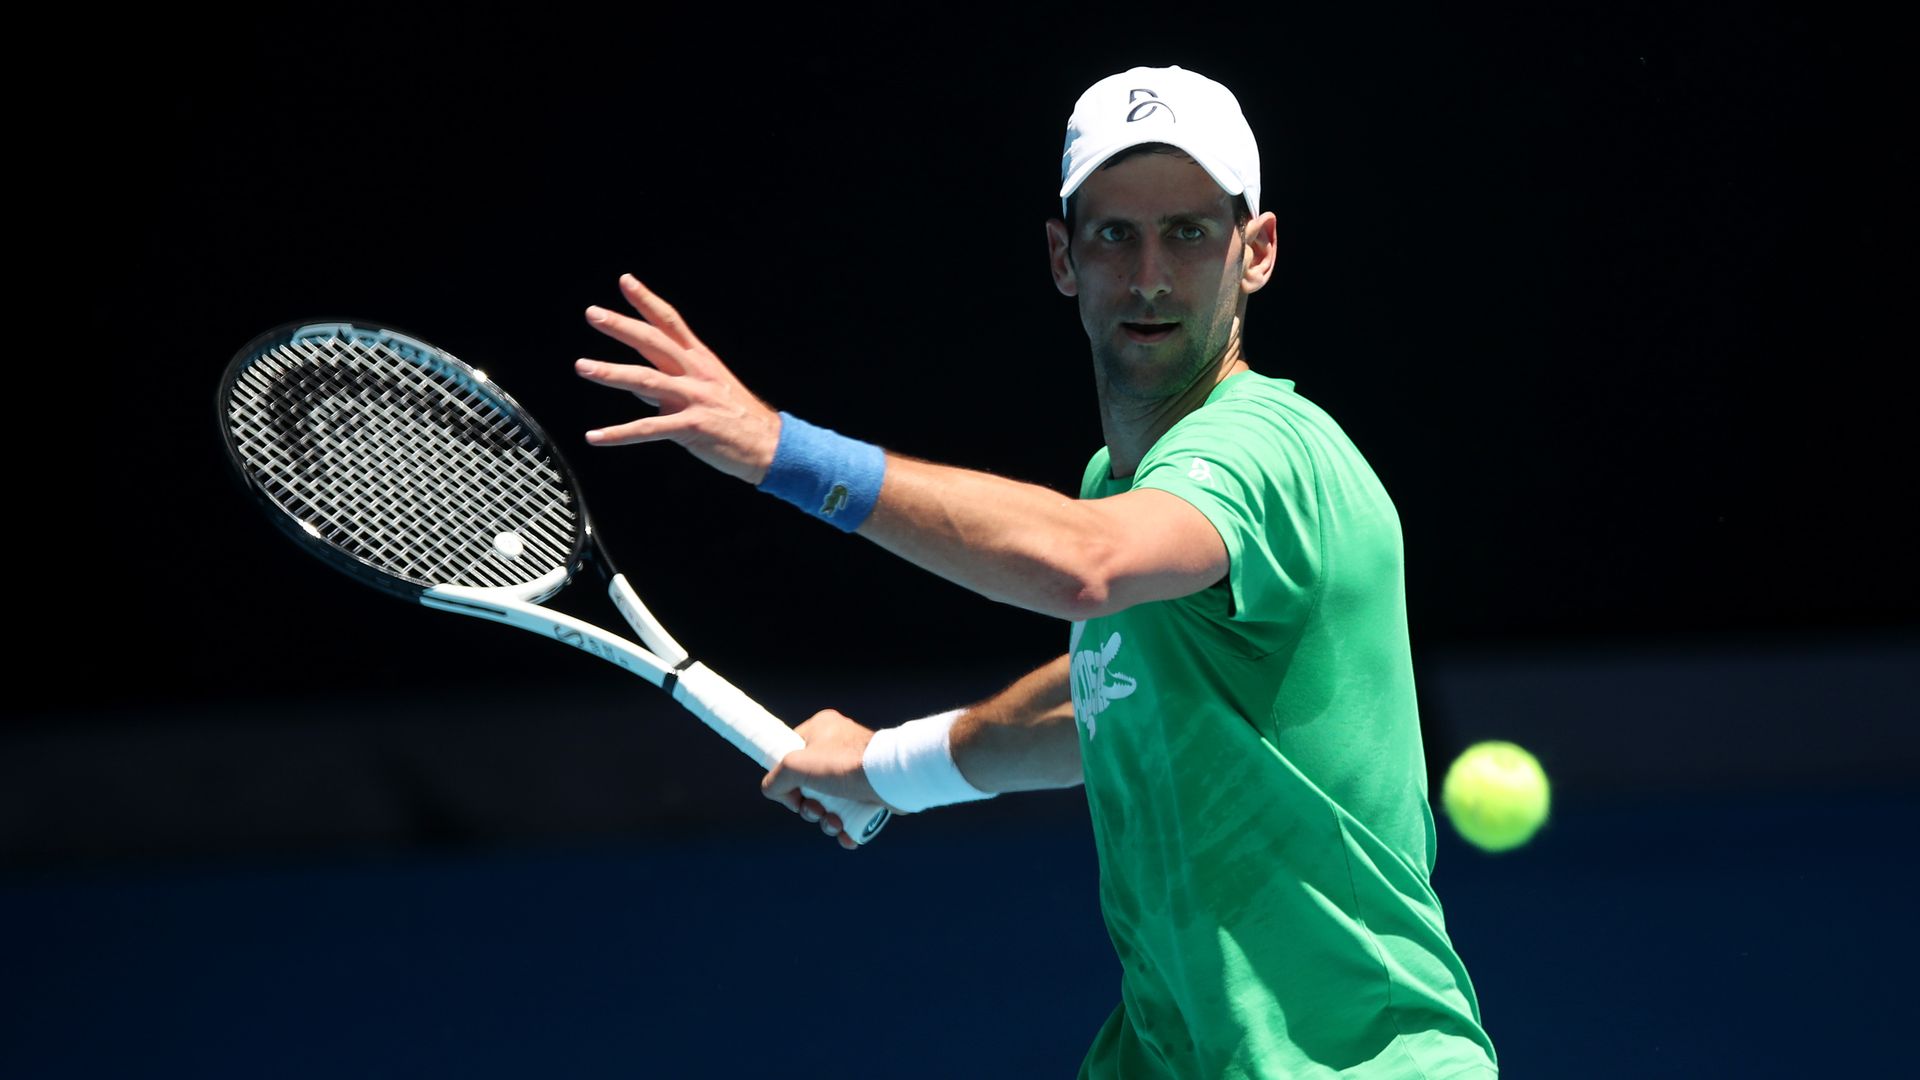 Photo of Novak Djokovic with his racket swung behind him as a tennis ball approaches